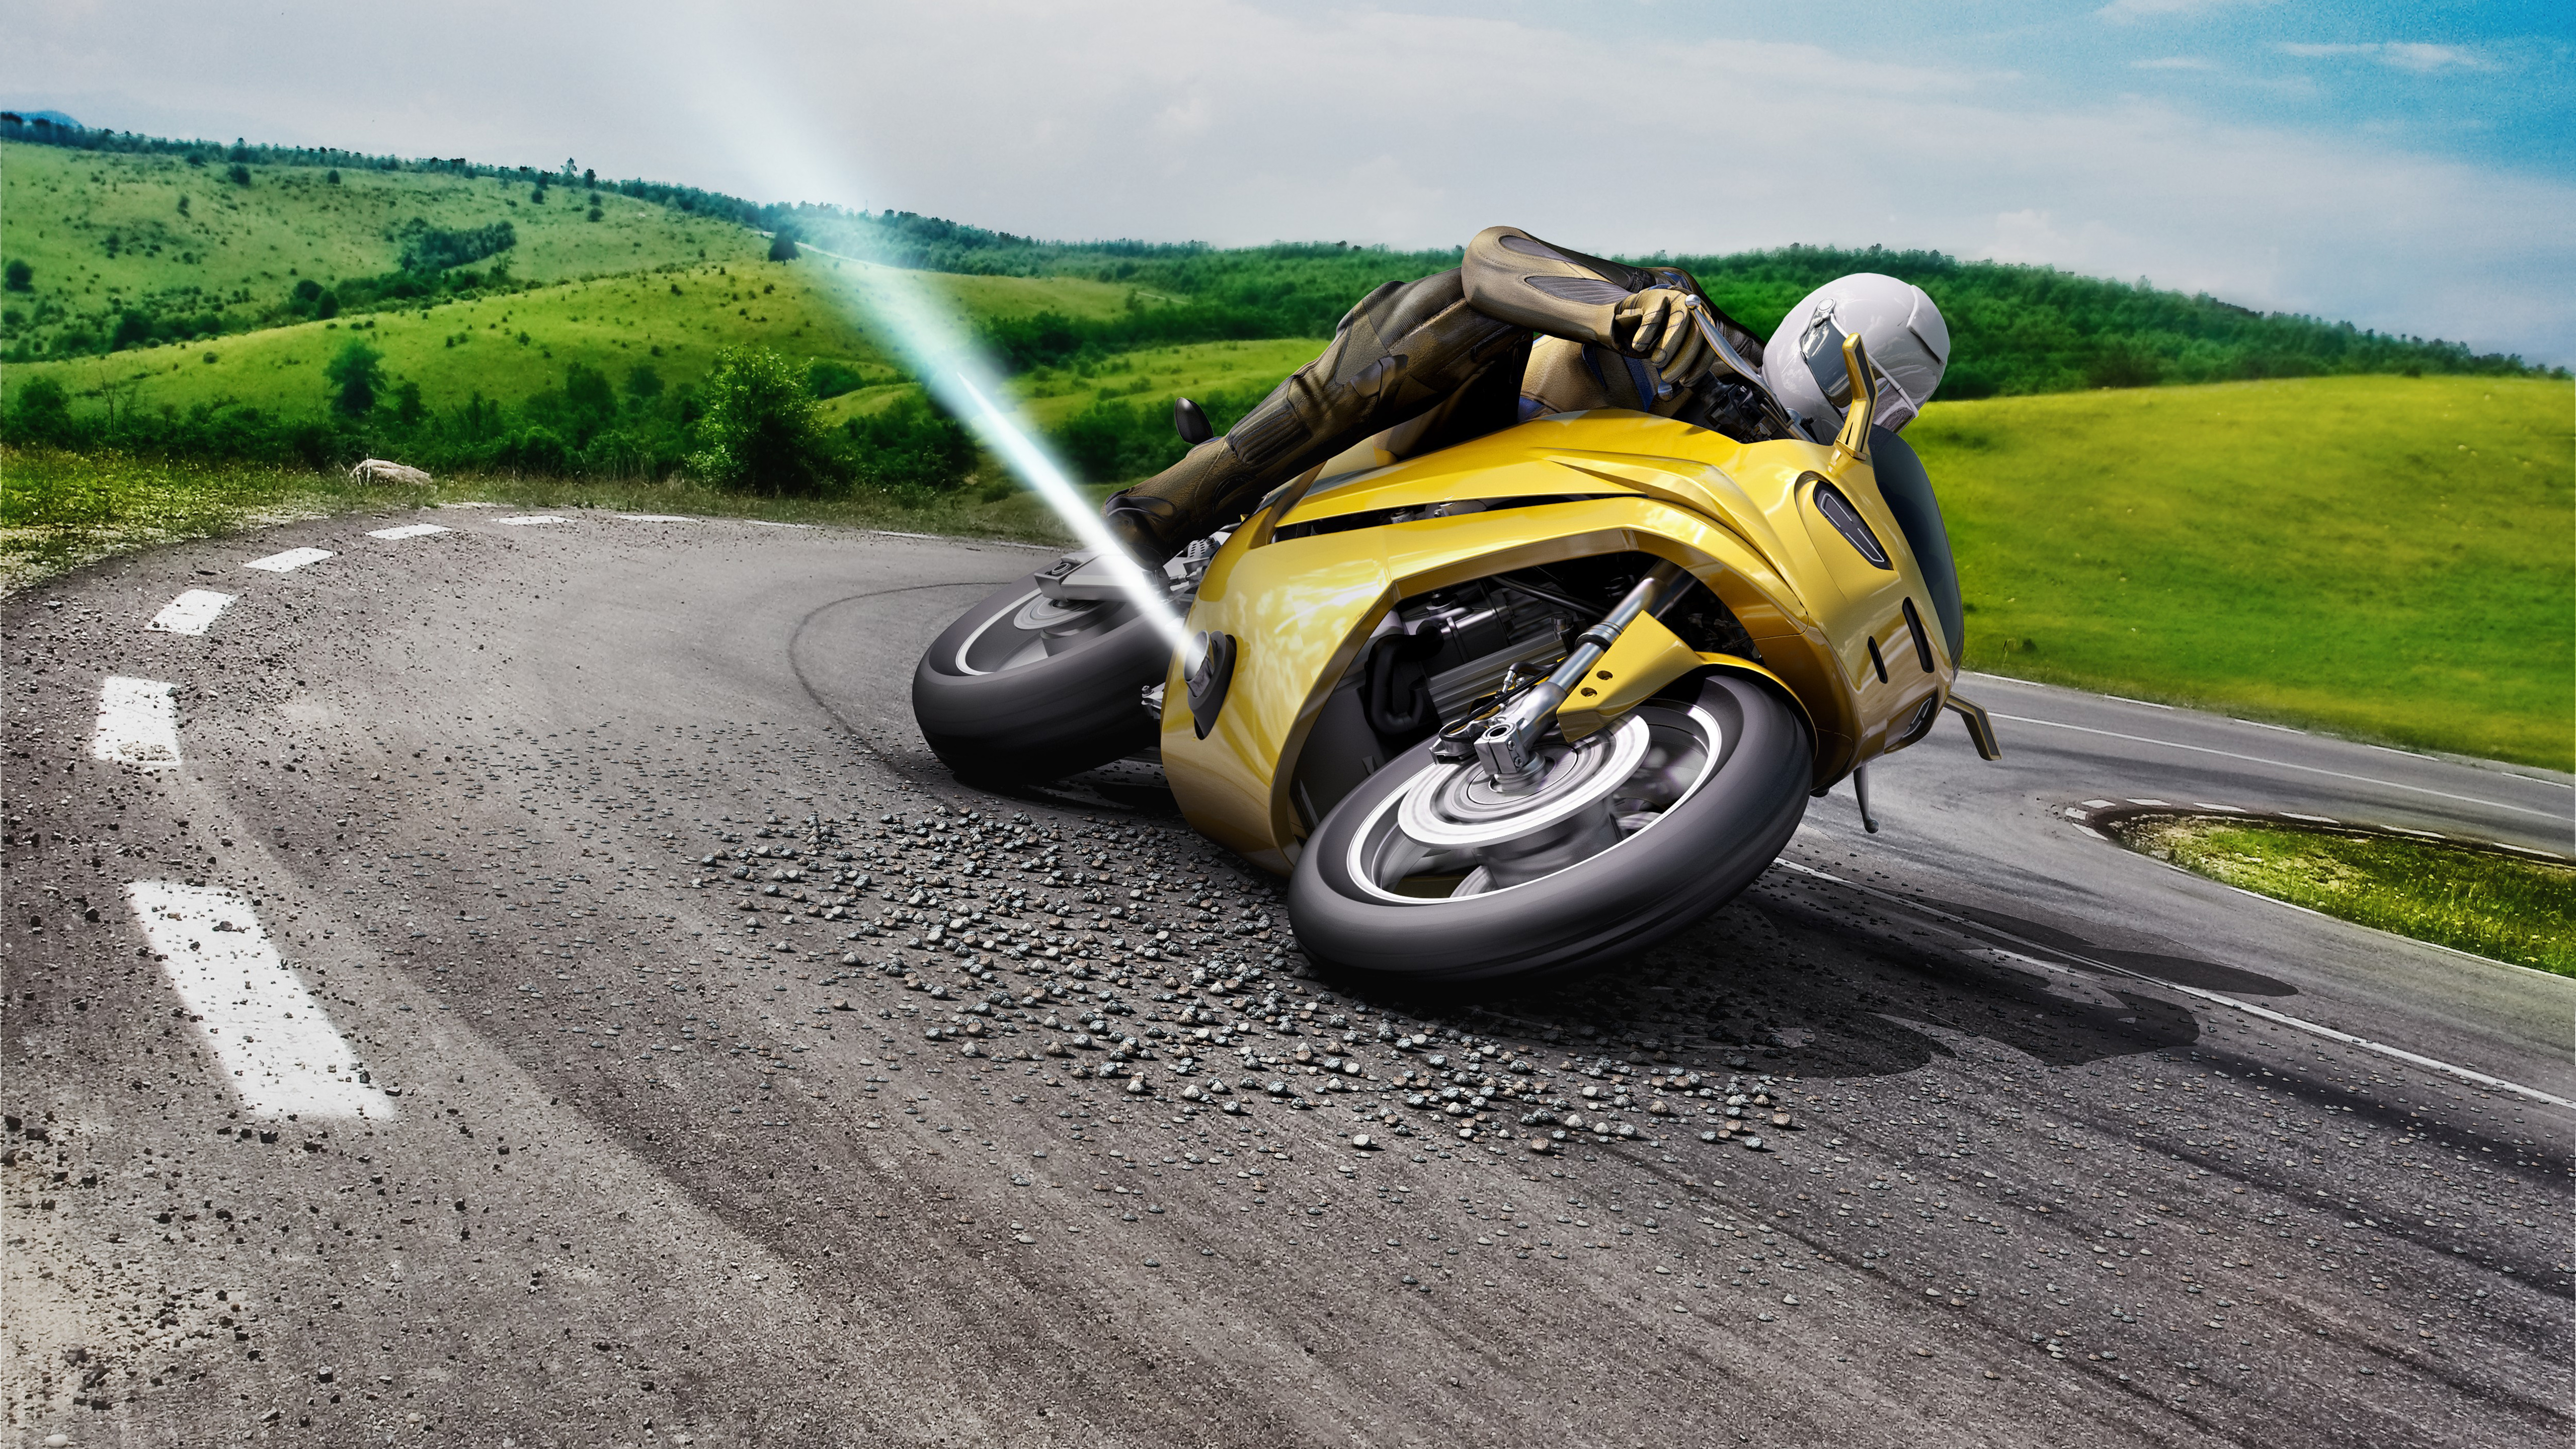 Motorcycle stability control by Bosch 5K Wallpapers